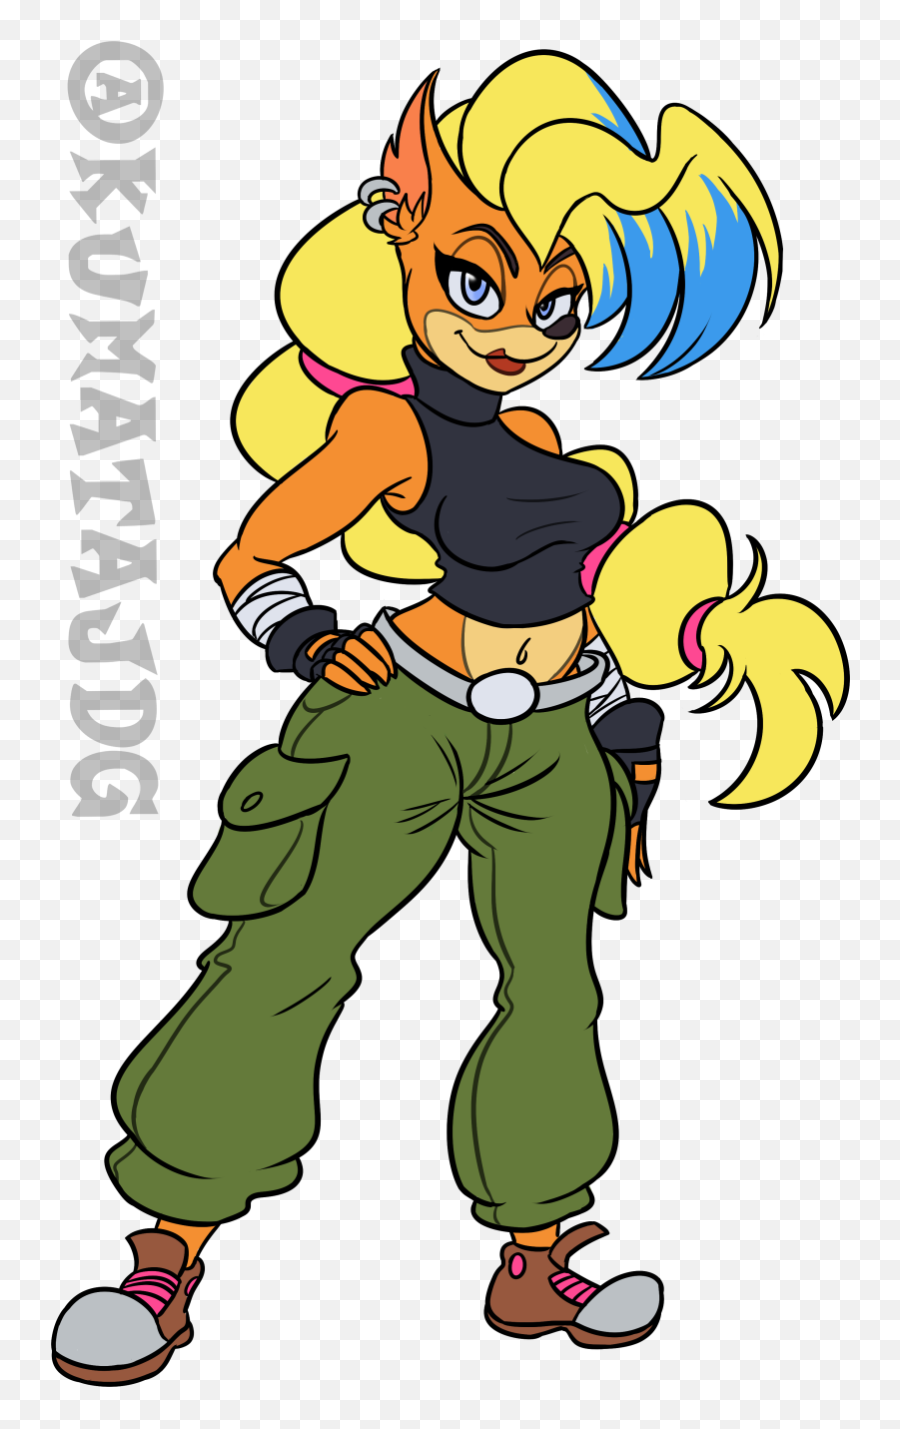 Got Commissioned To Draw Tawna In This Outfit From The Emoji,Kim Possible Png